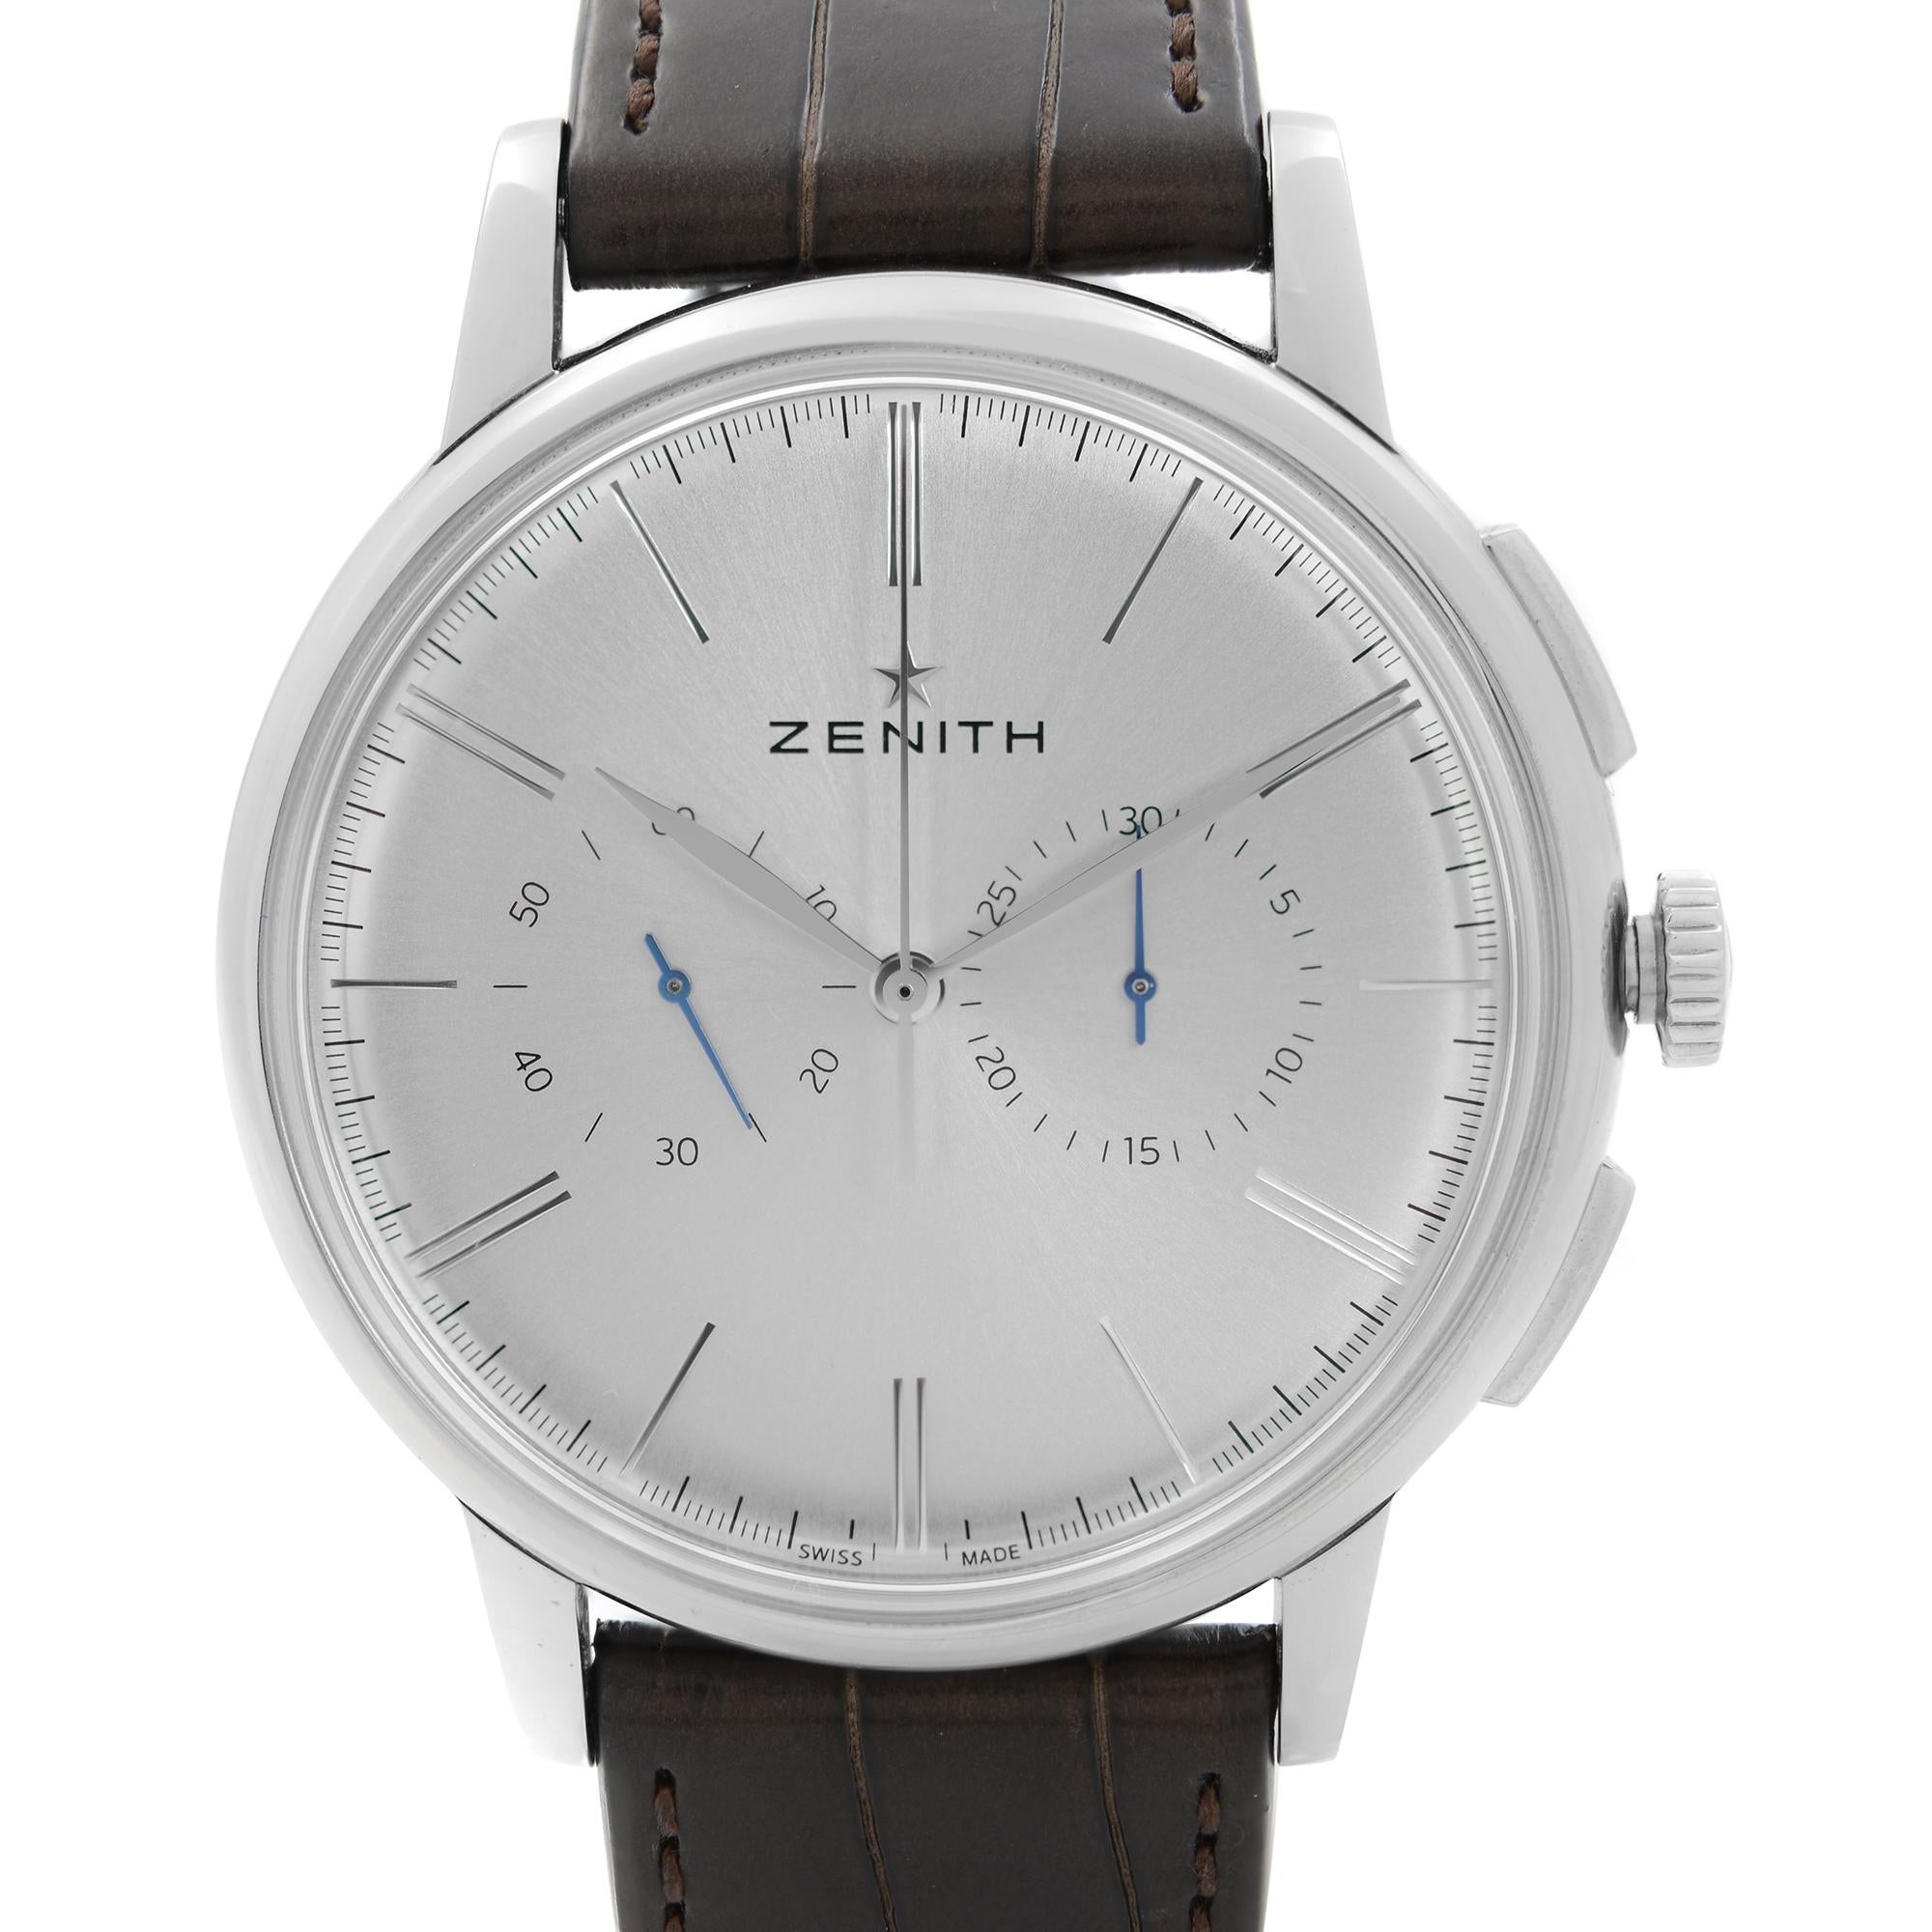 Unworn Zenith Elite 42 mm Chronograph Stainless Steel Silver Dial Men's Automatic Watch 03.2270.4069. The Watch is powered by an Automatic Movement. This Beautiful Timepiece Features: Polished Stainless Steel Round Case and Two-Piece Alligator